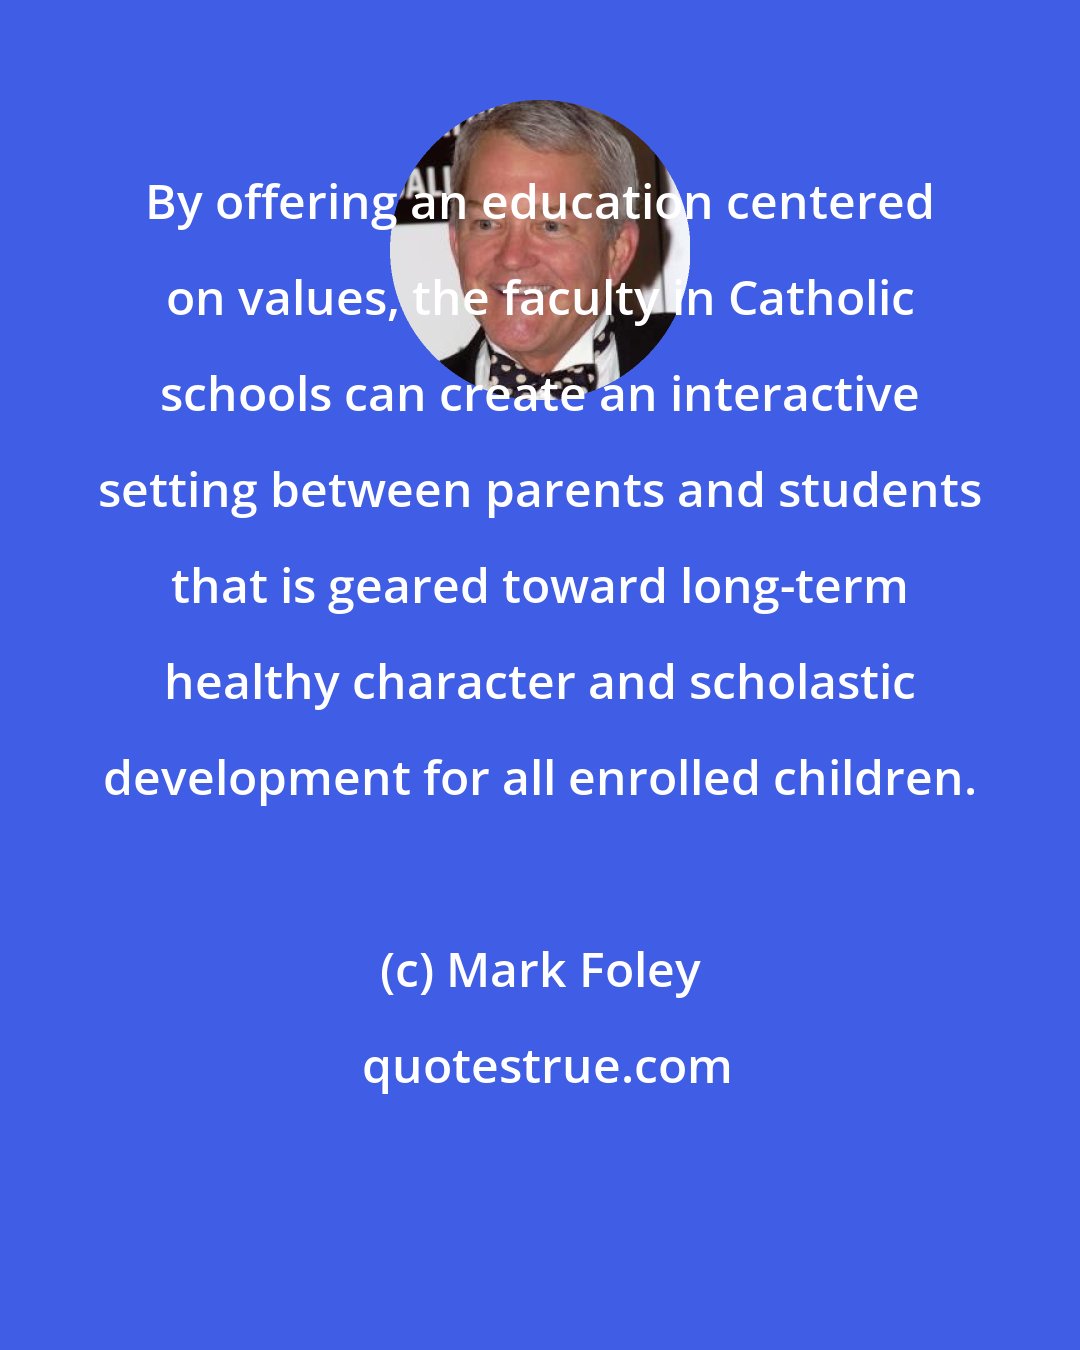 Mark Foley: By offering an education centered on values, the faculty in Catholic schools can create an interactive setting between parents and students that is geared toward long-term healthy character and scholastic development for all enrolled children.